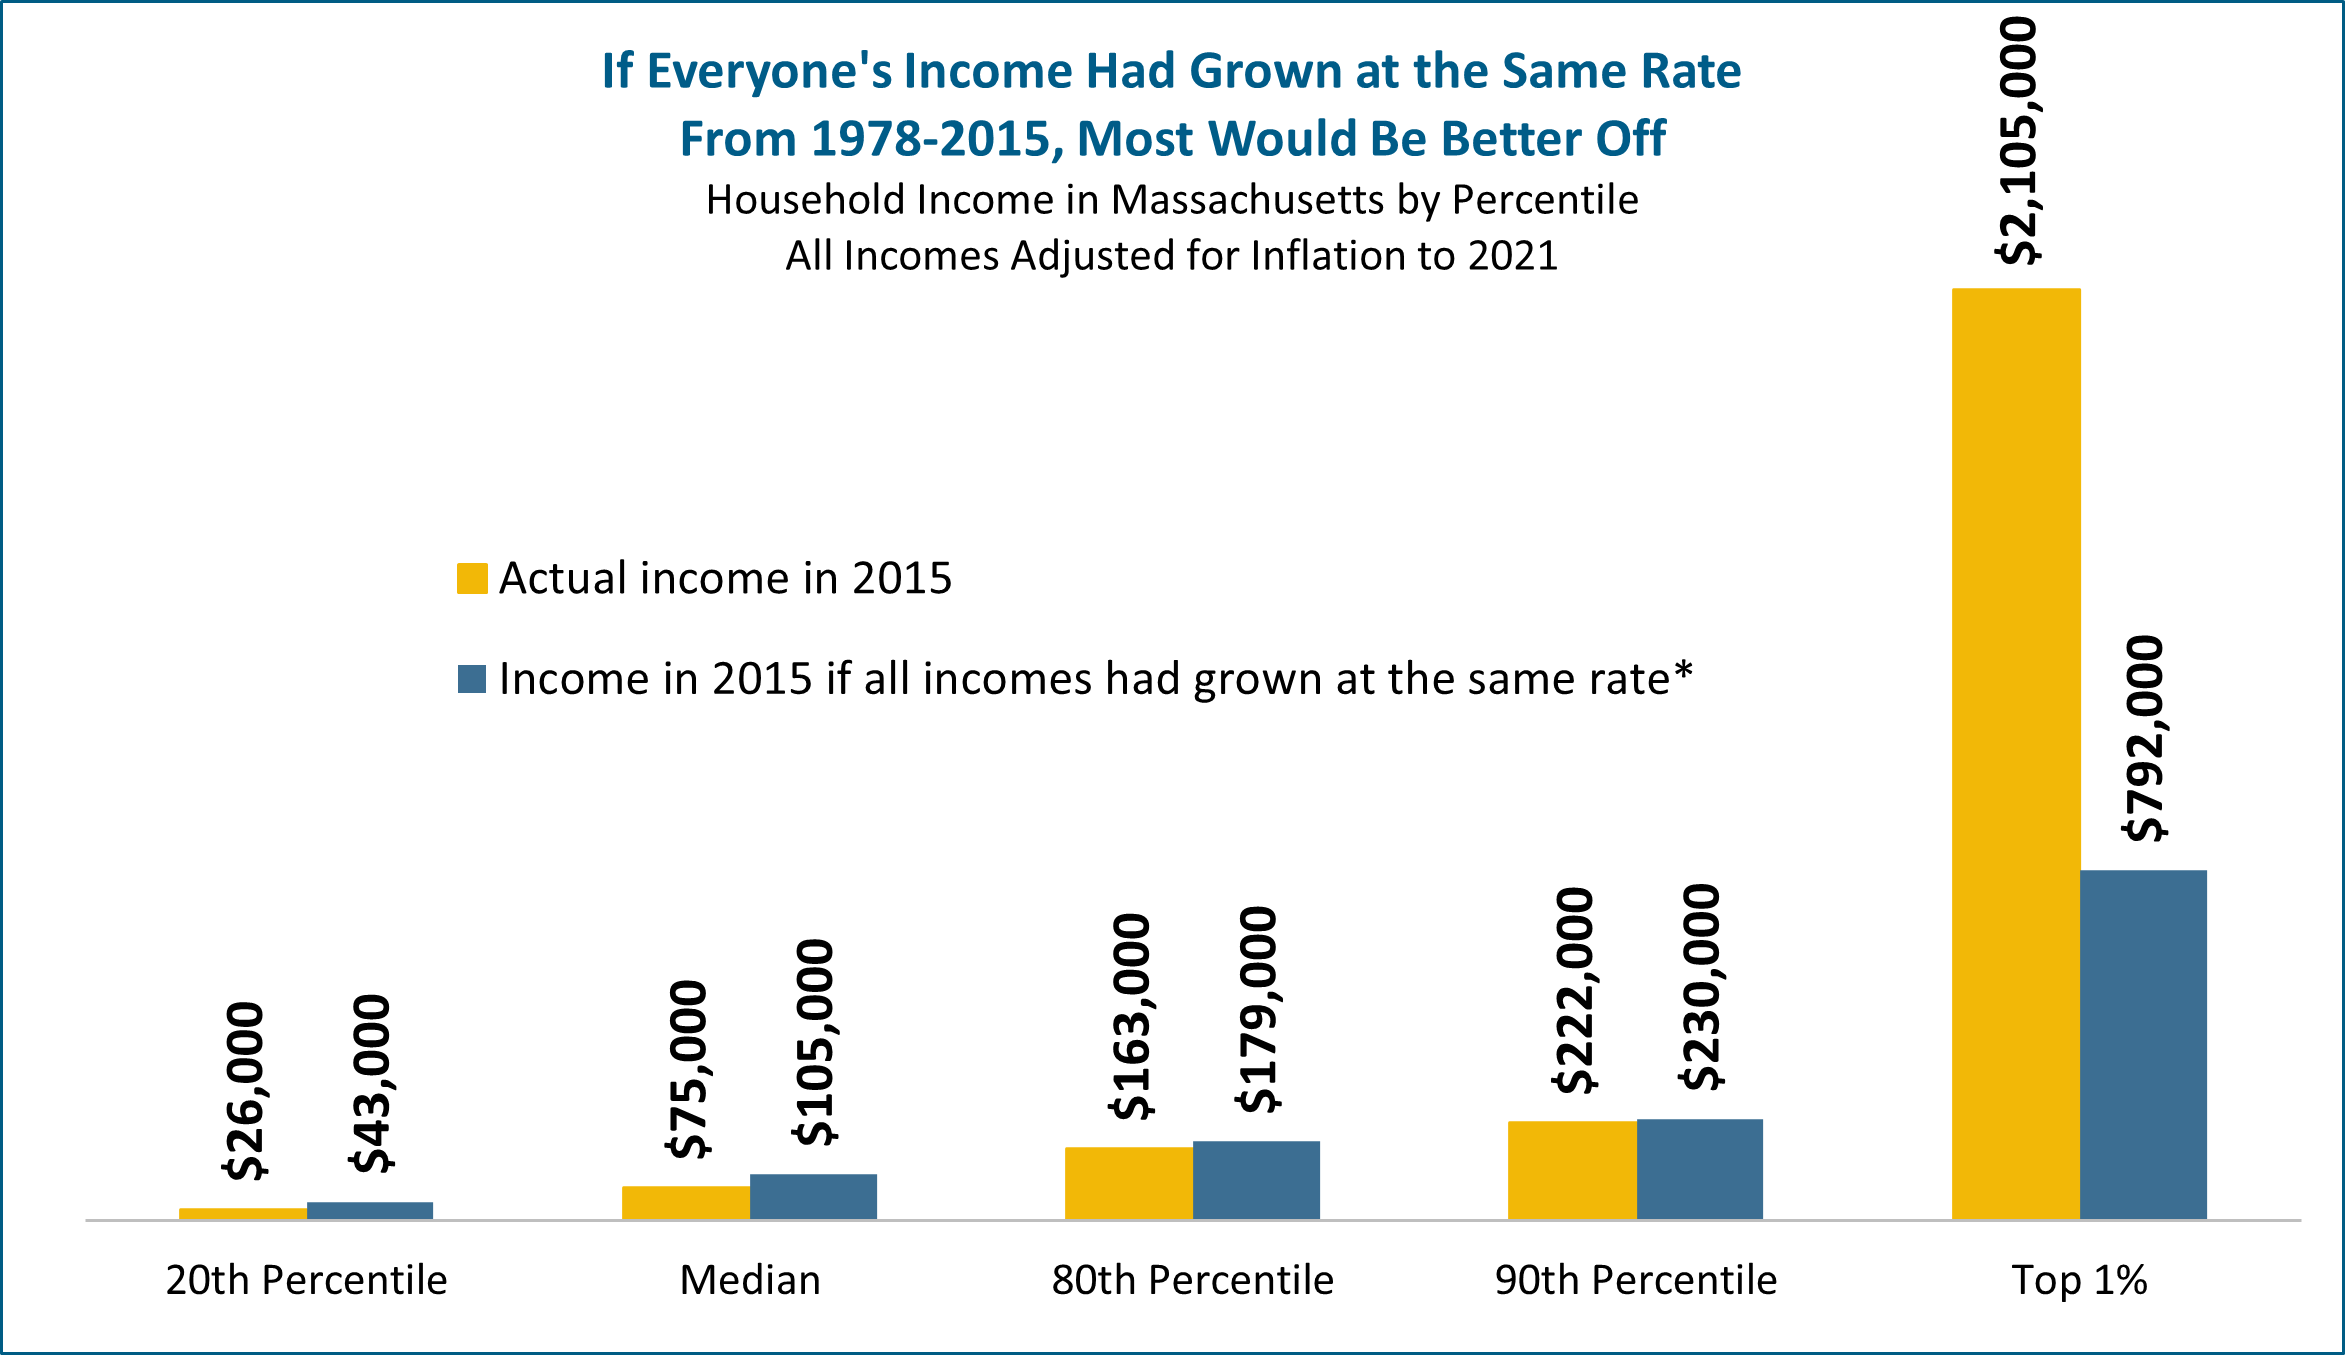 Bar chart: If everyone's income had grown at the same rate from 1978 to 2015, most would be better off - household income in MA by percentile, adjusted for inflation to 2021